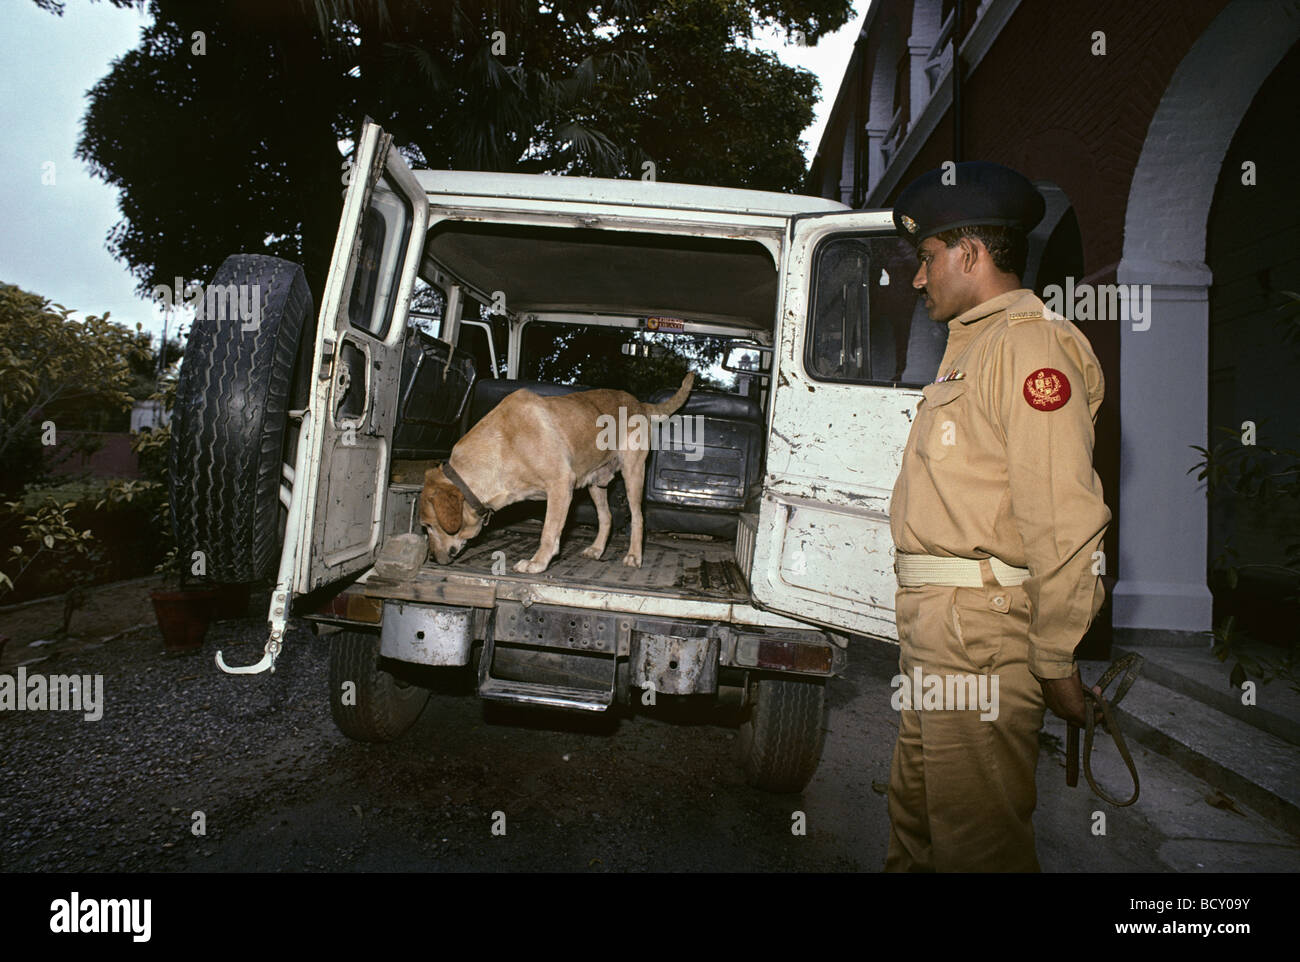 A drug sniffing dog trained by Pakistan's Anti Narcotics Force searches inside a truck Stock Photo